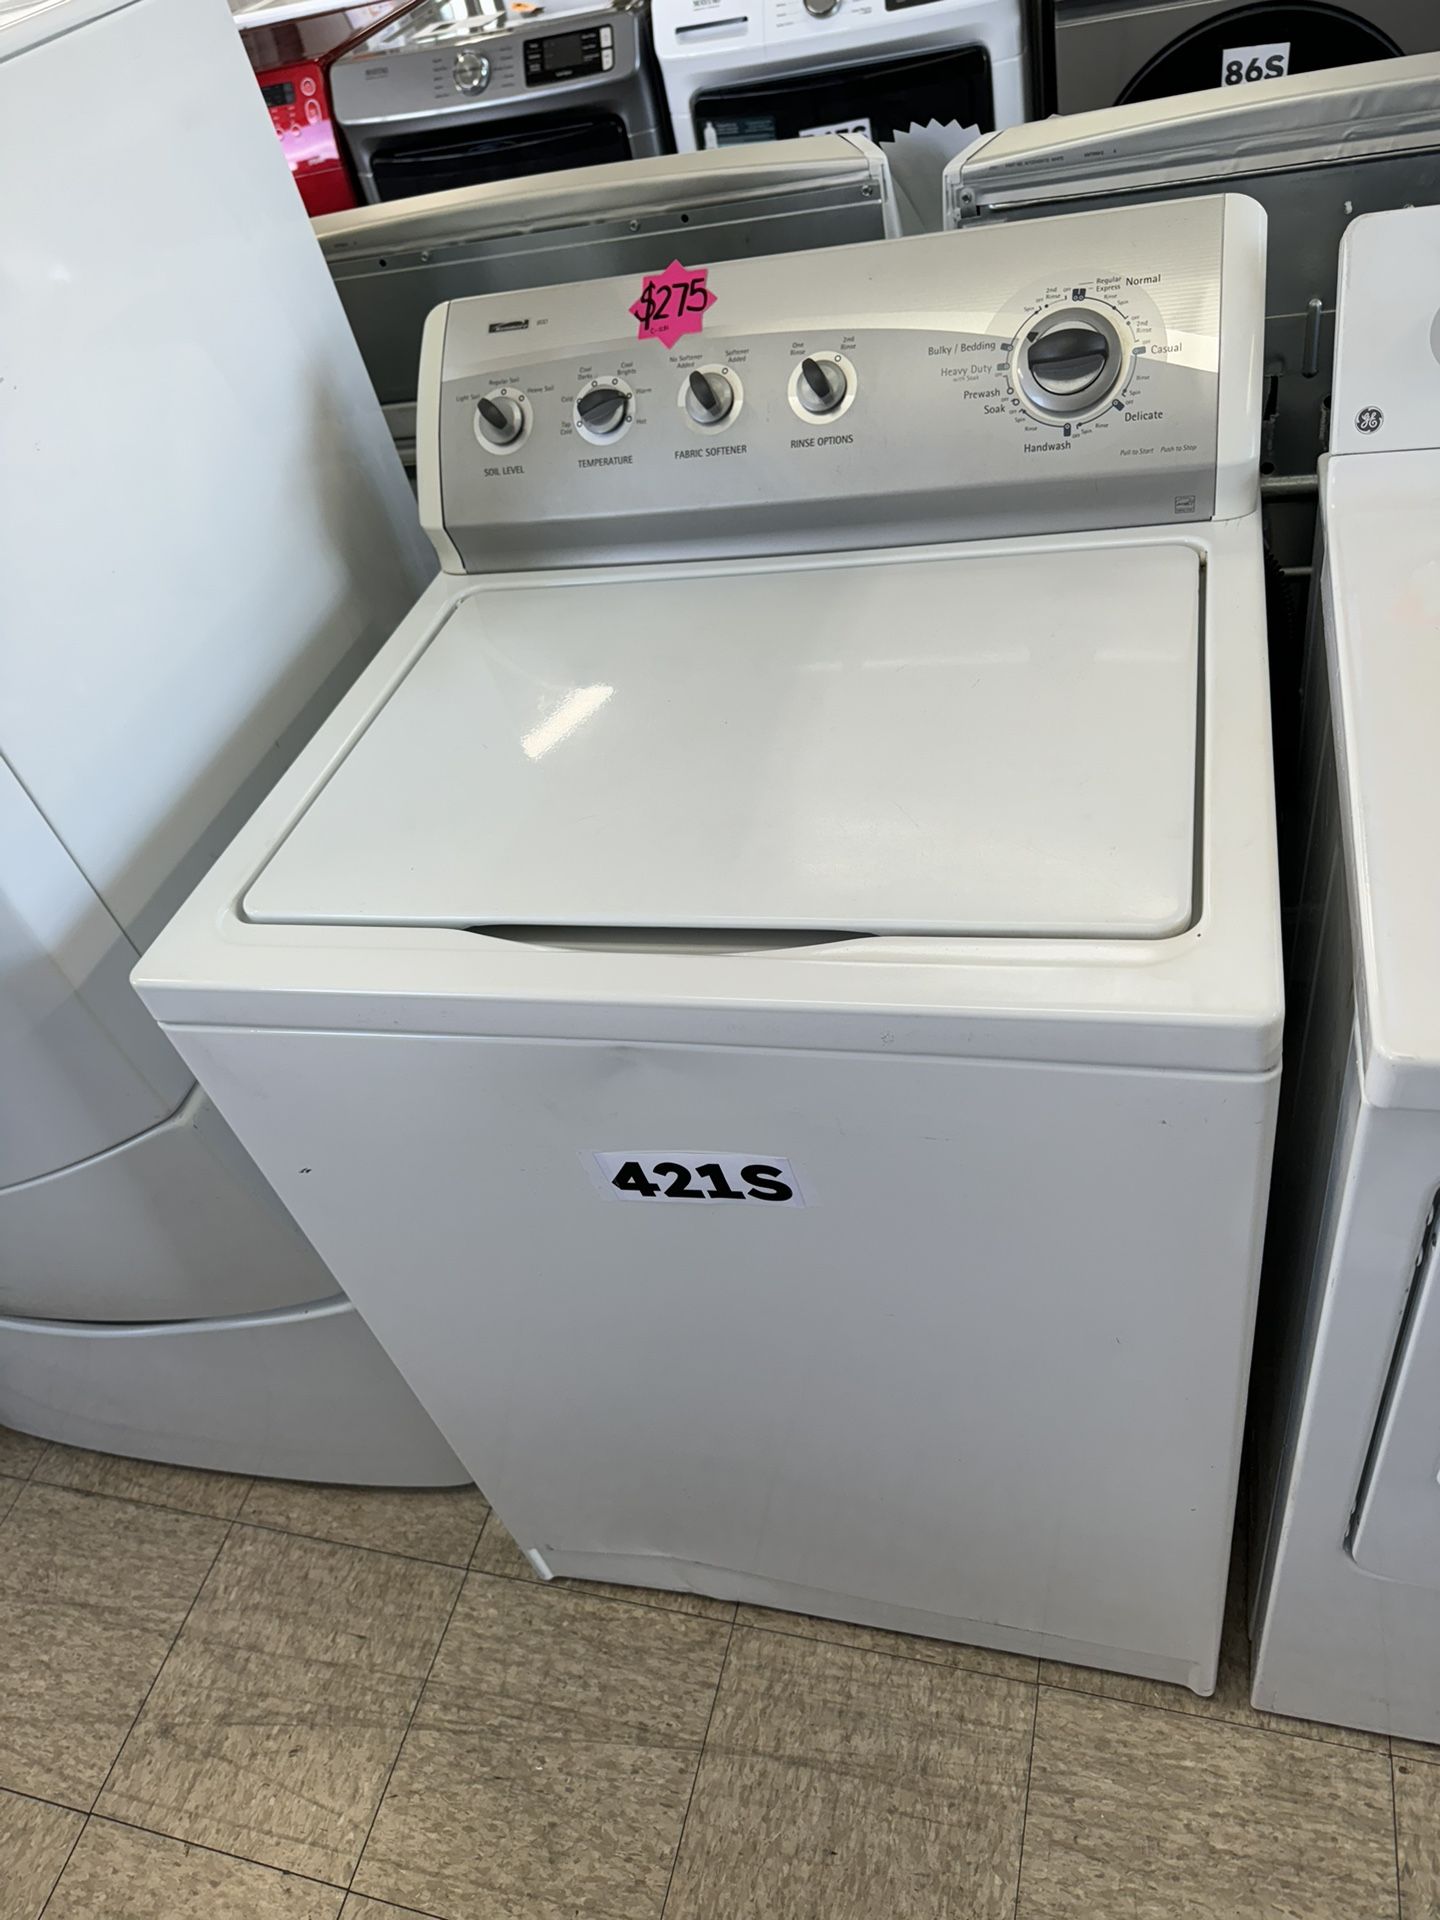 Kenmore Top Load Washer 